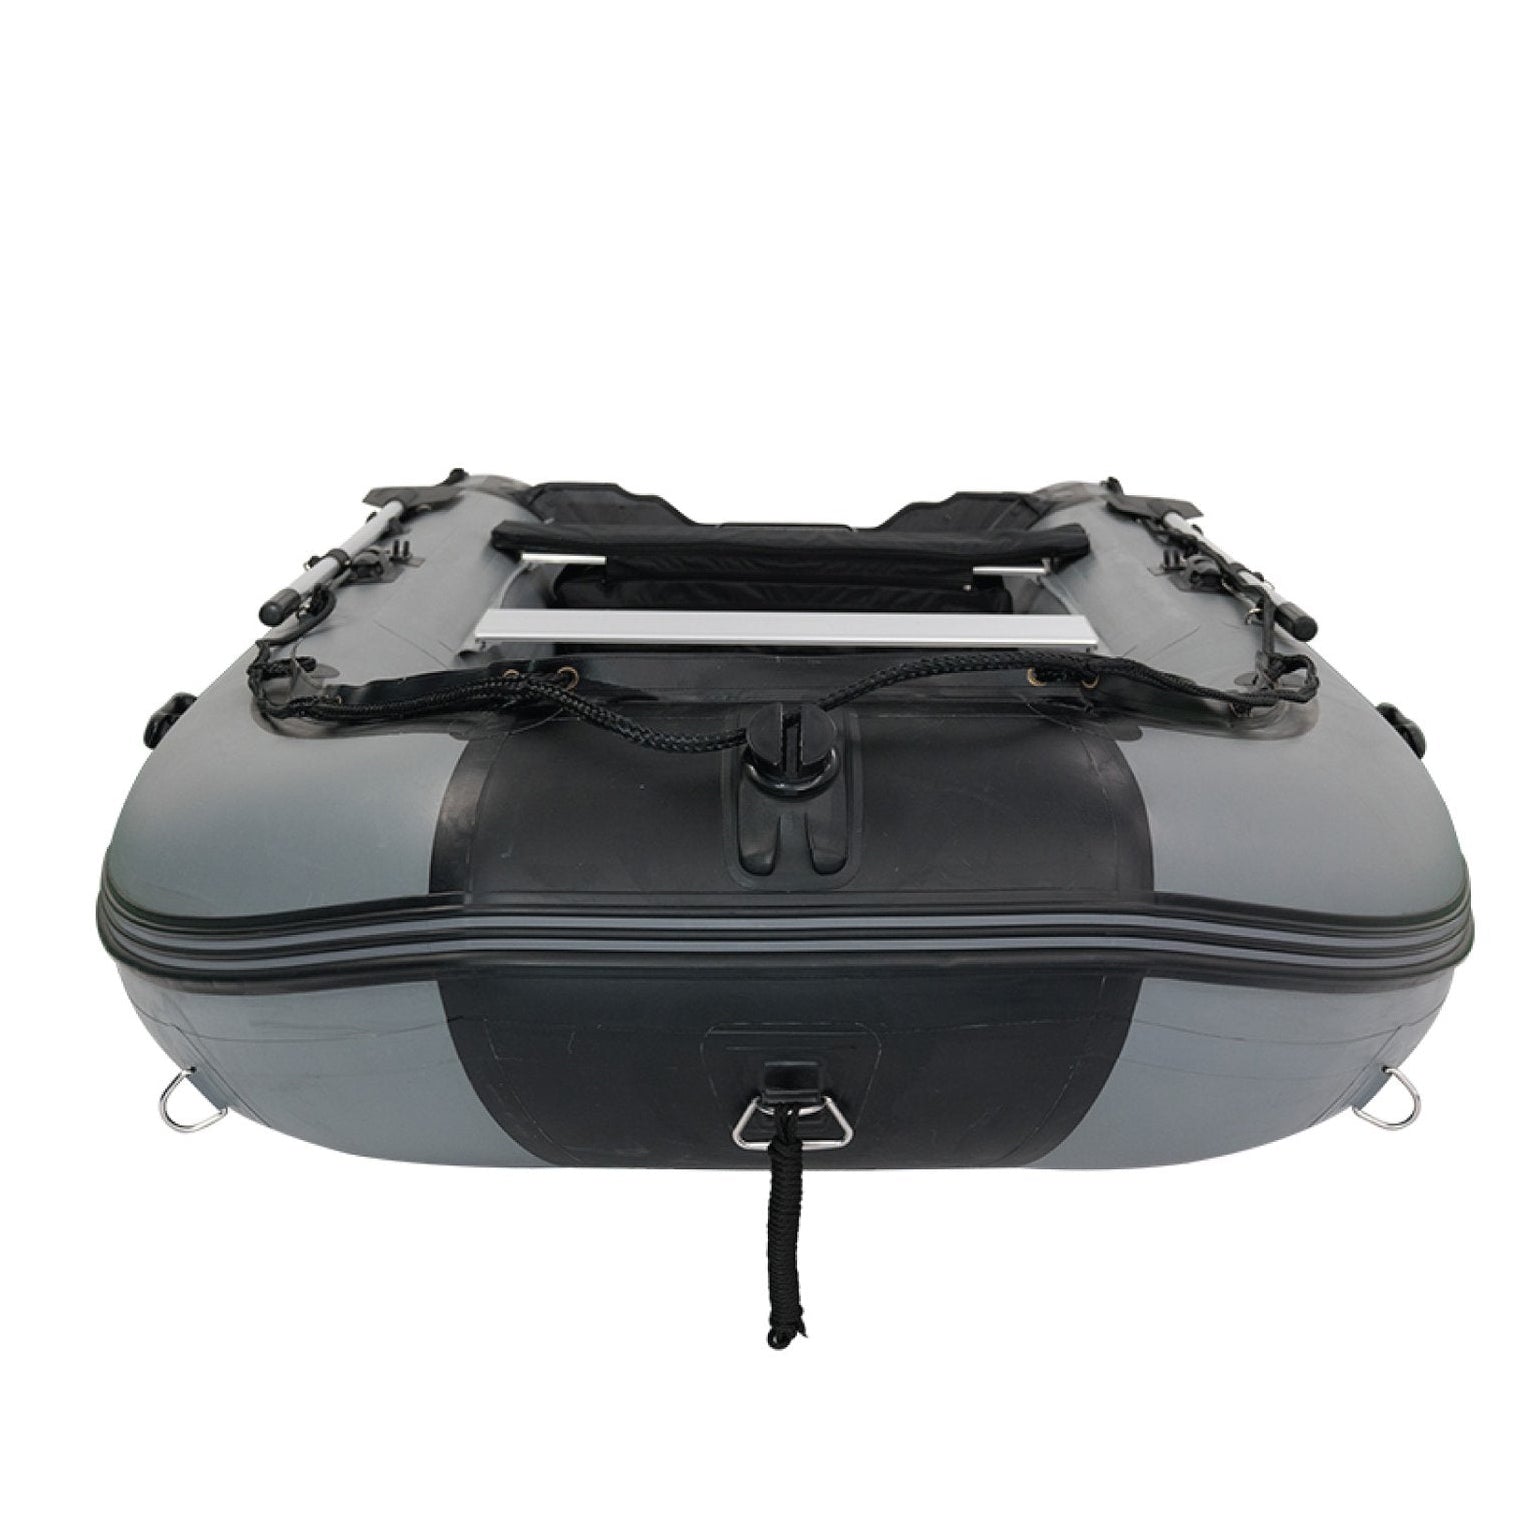 https://swellfish.co/cdn/shop/products/classic-inflatable-boat-648696.jpg?v=1666991162&width=1946